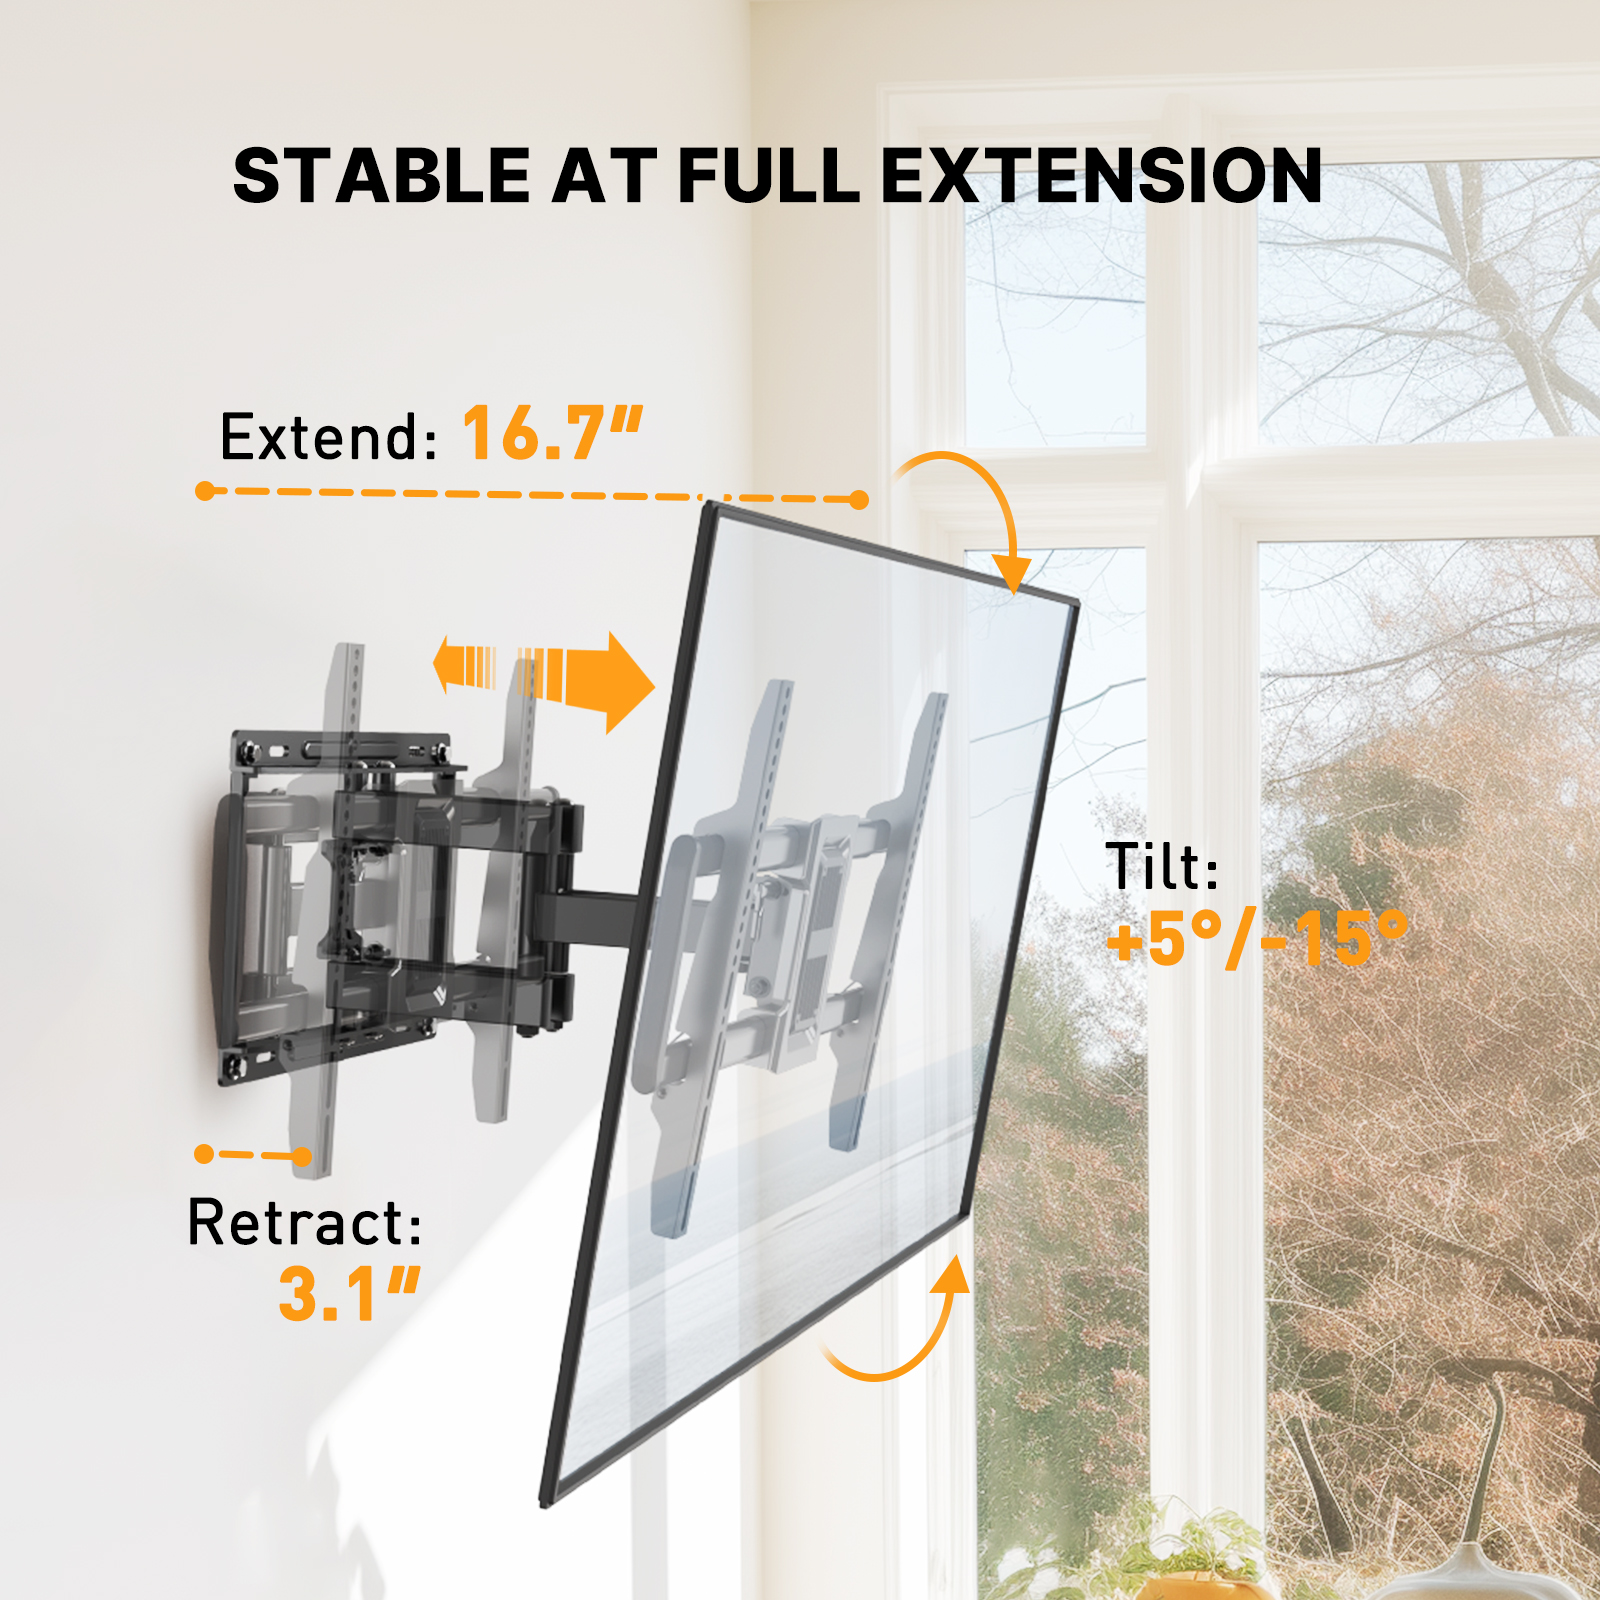 Full Motion TV Wall Mount for 40-82 inch TVs with Swivel, Tilting & Extension Max 600x400, up to 100 lbs - image 4 of 7